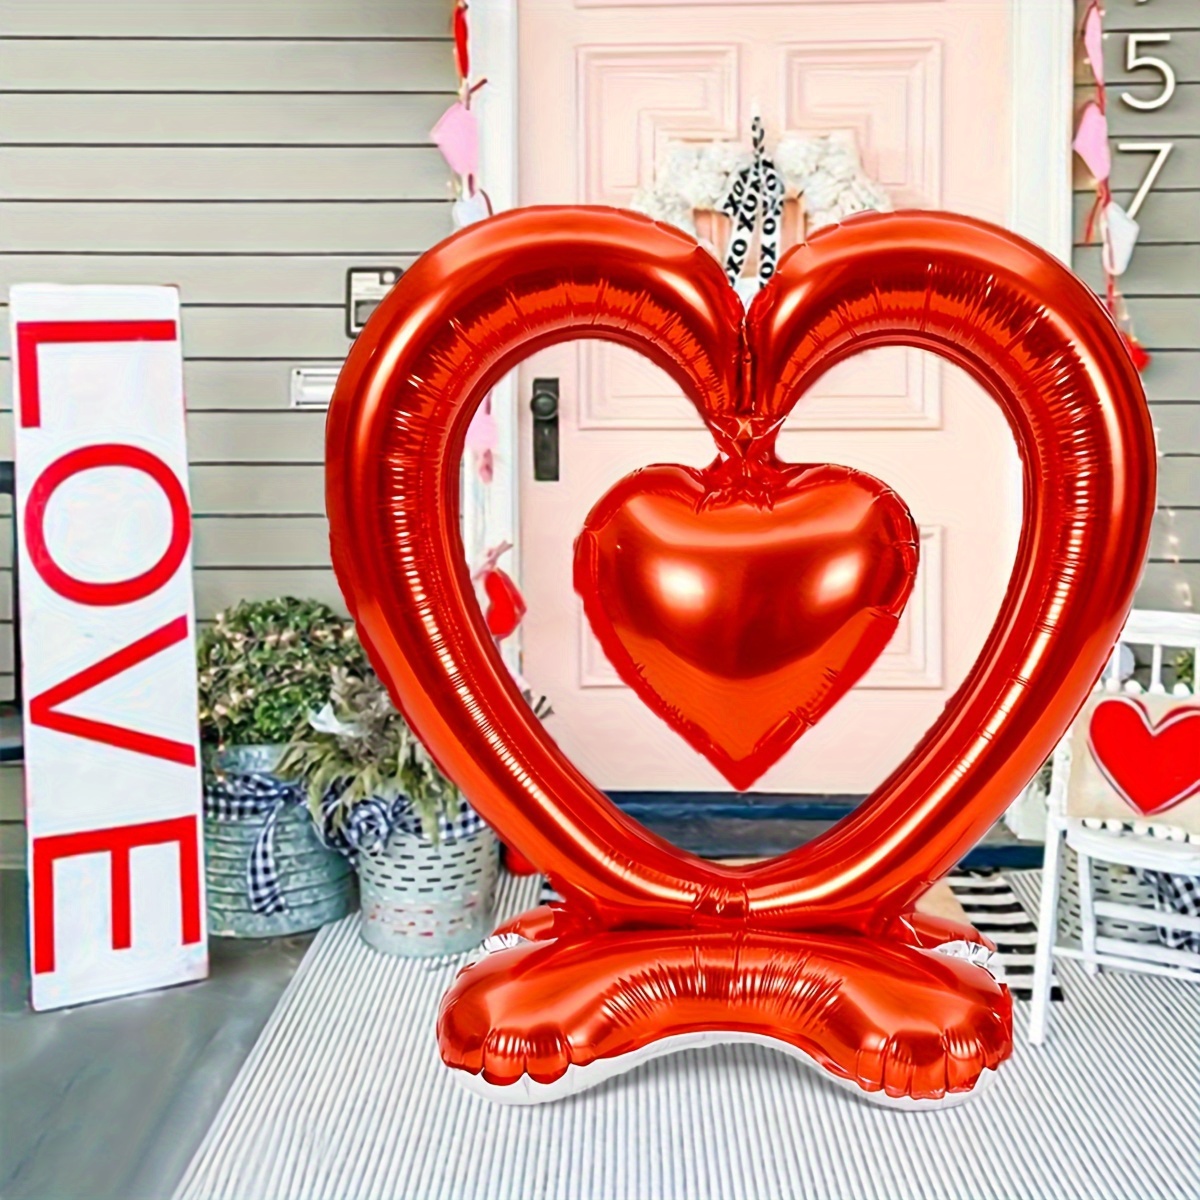 

1pc, 58" Giant Love Heart Balloon, Valentine's Day Romantic Decor, Anniversary Celebration, Standing Inflatable Foil Balloon, Love Theme Party Decoration, Indoor & Outdoor Atmosphere Setter